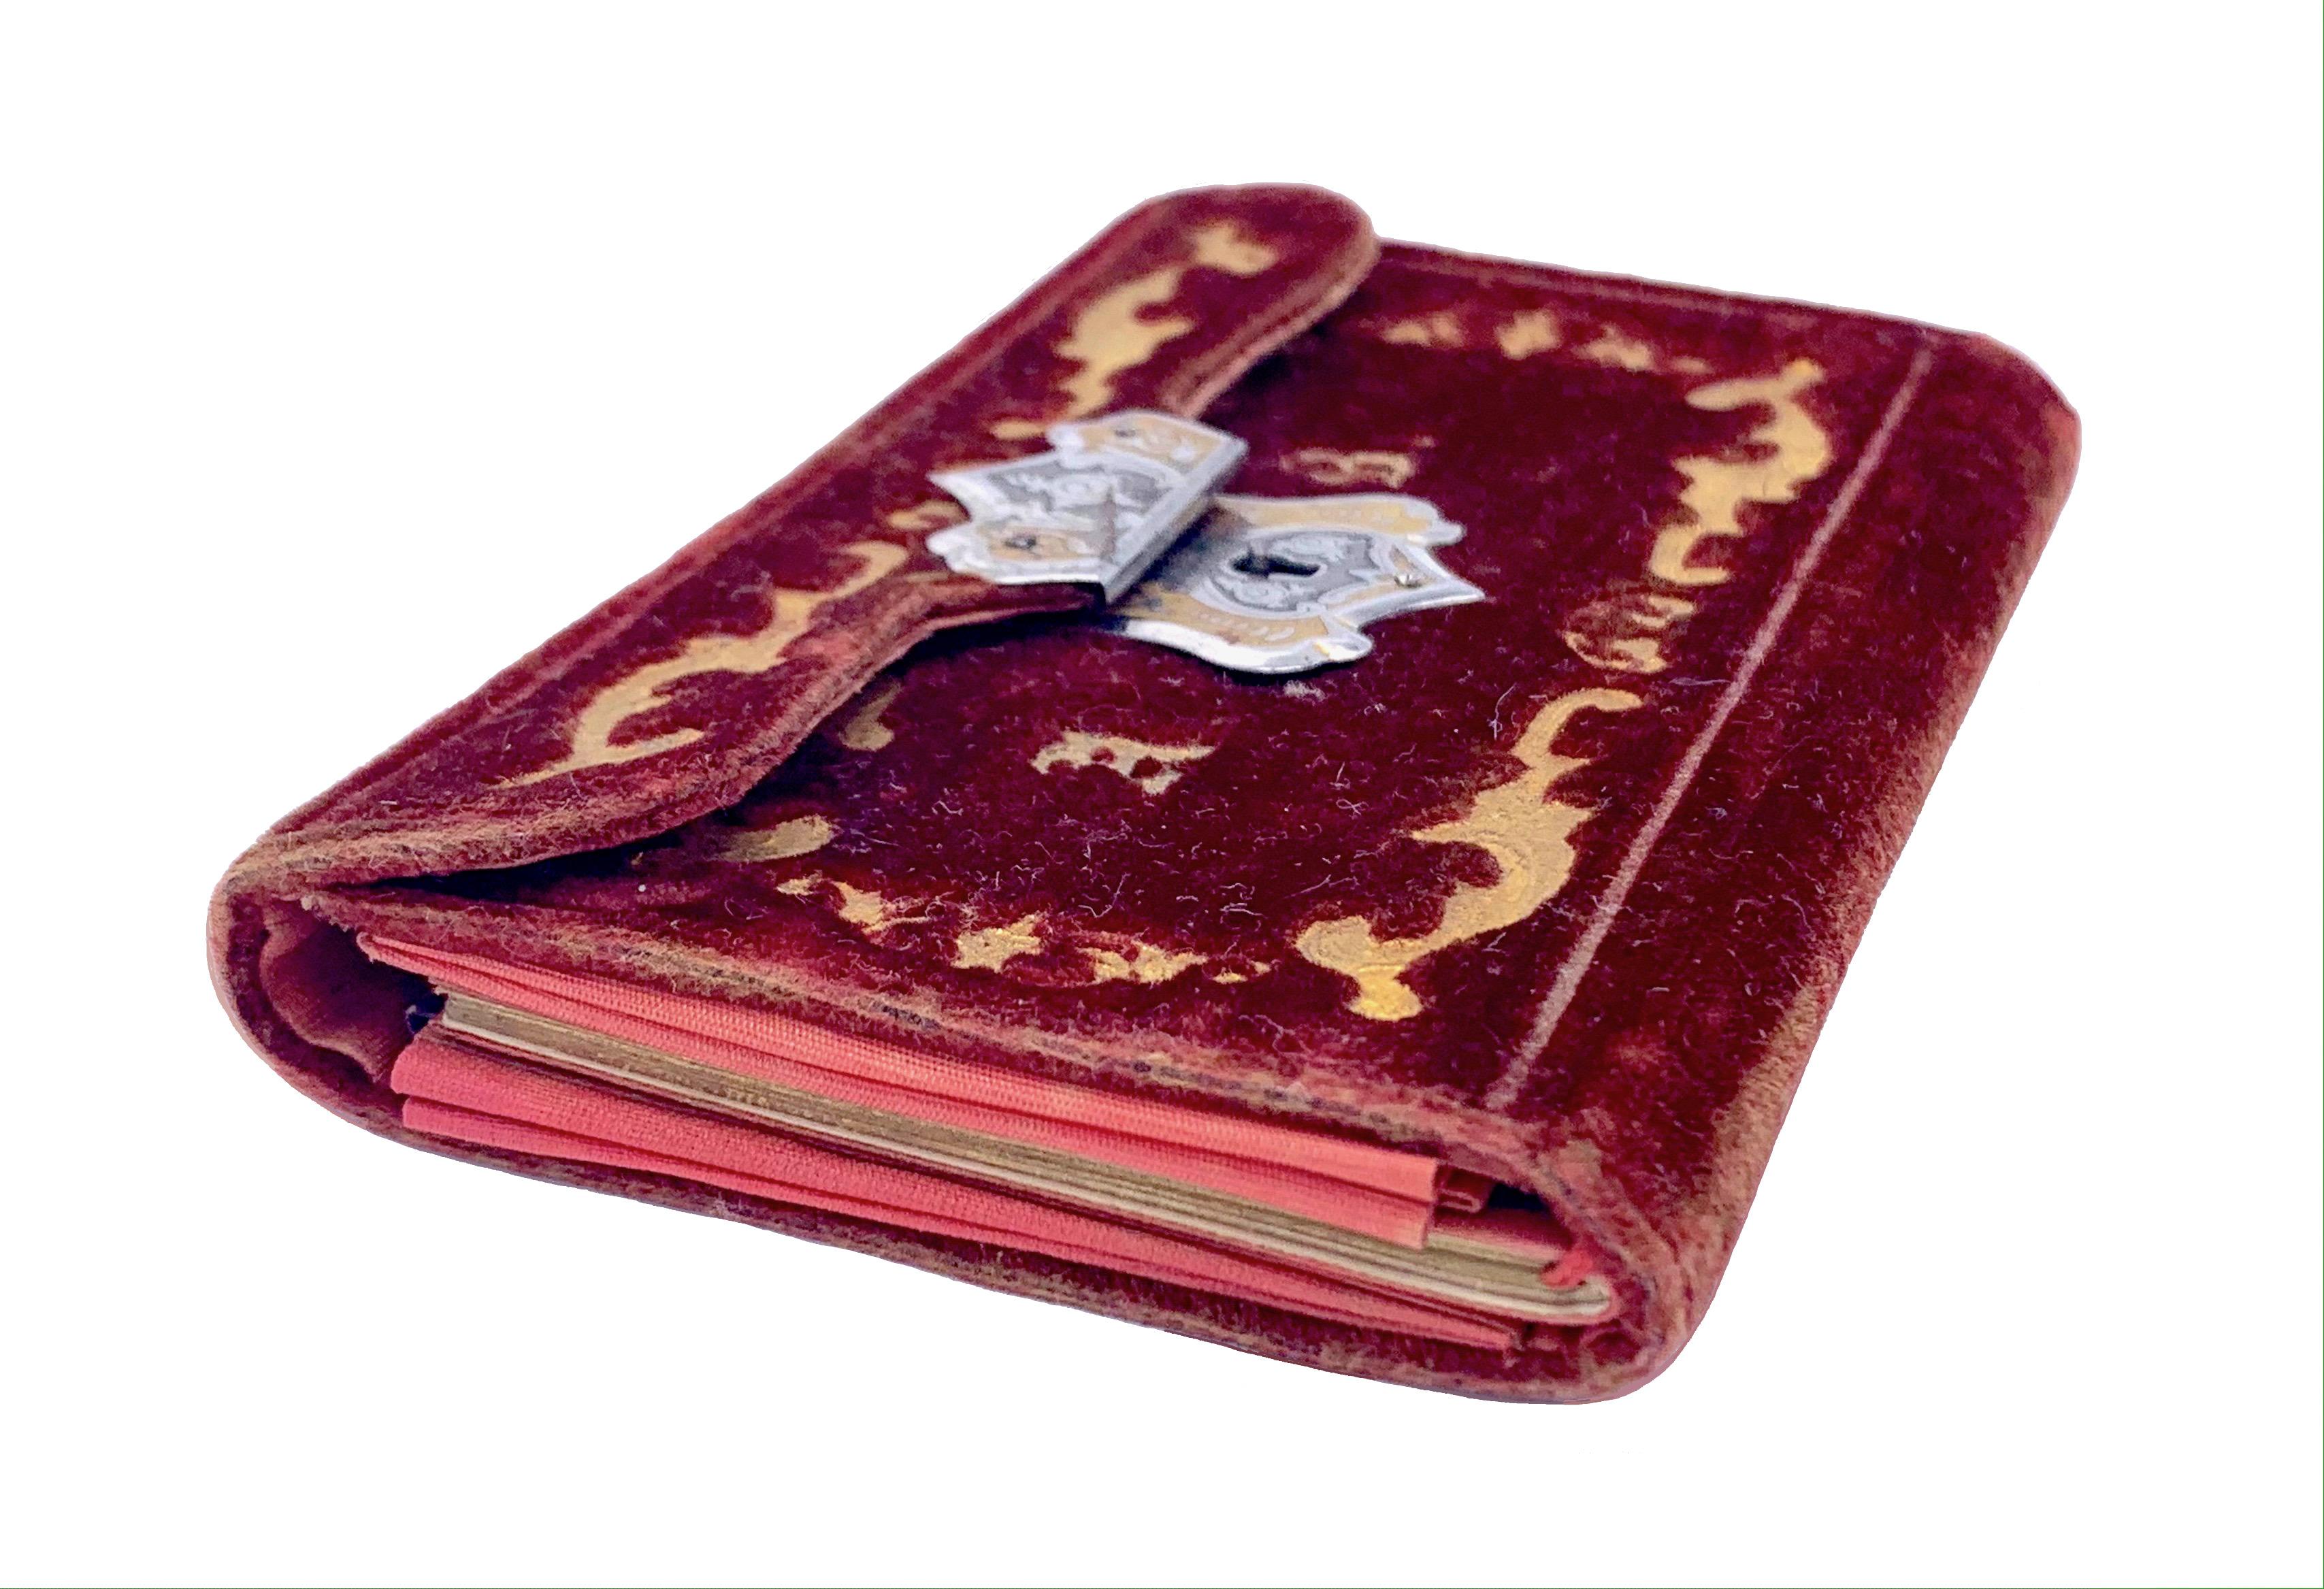 This magnificent small velvet Notebook/ purse has been used as a carnet de bal, a dance card holder. It is decorated with elegant gold embossed Initials and scroll ornaments.
The vine red velvet is in fine condition and is fitted with a wonderful,